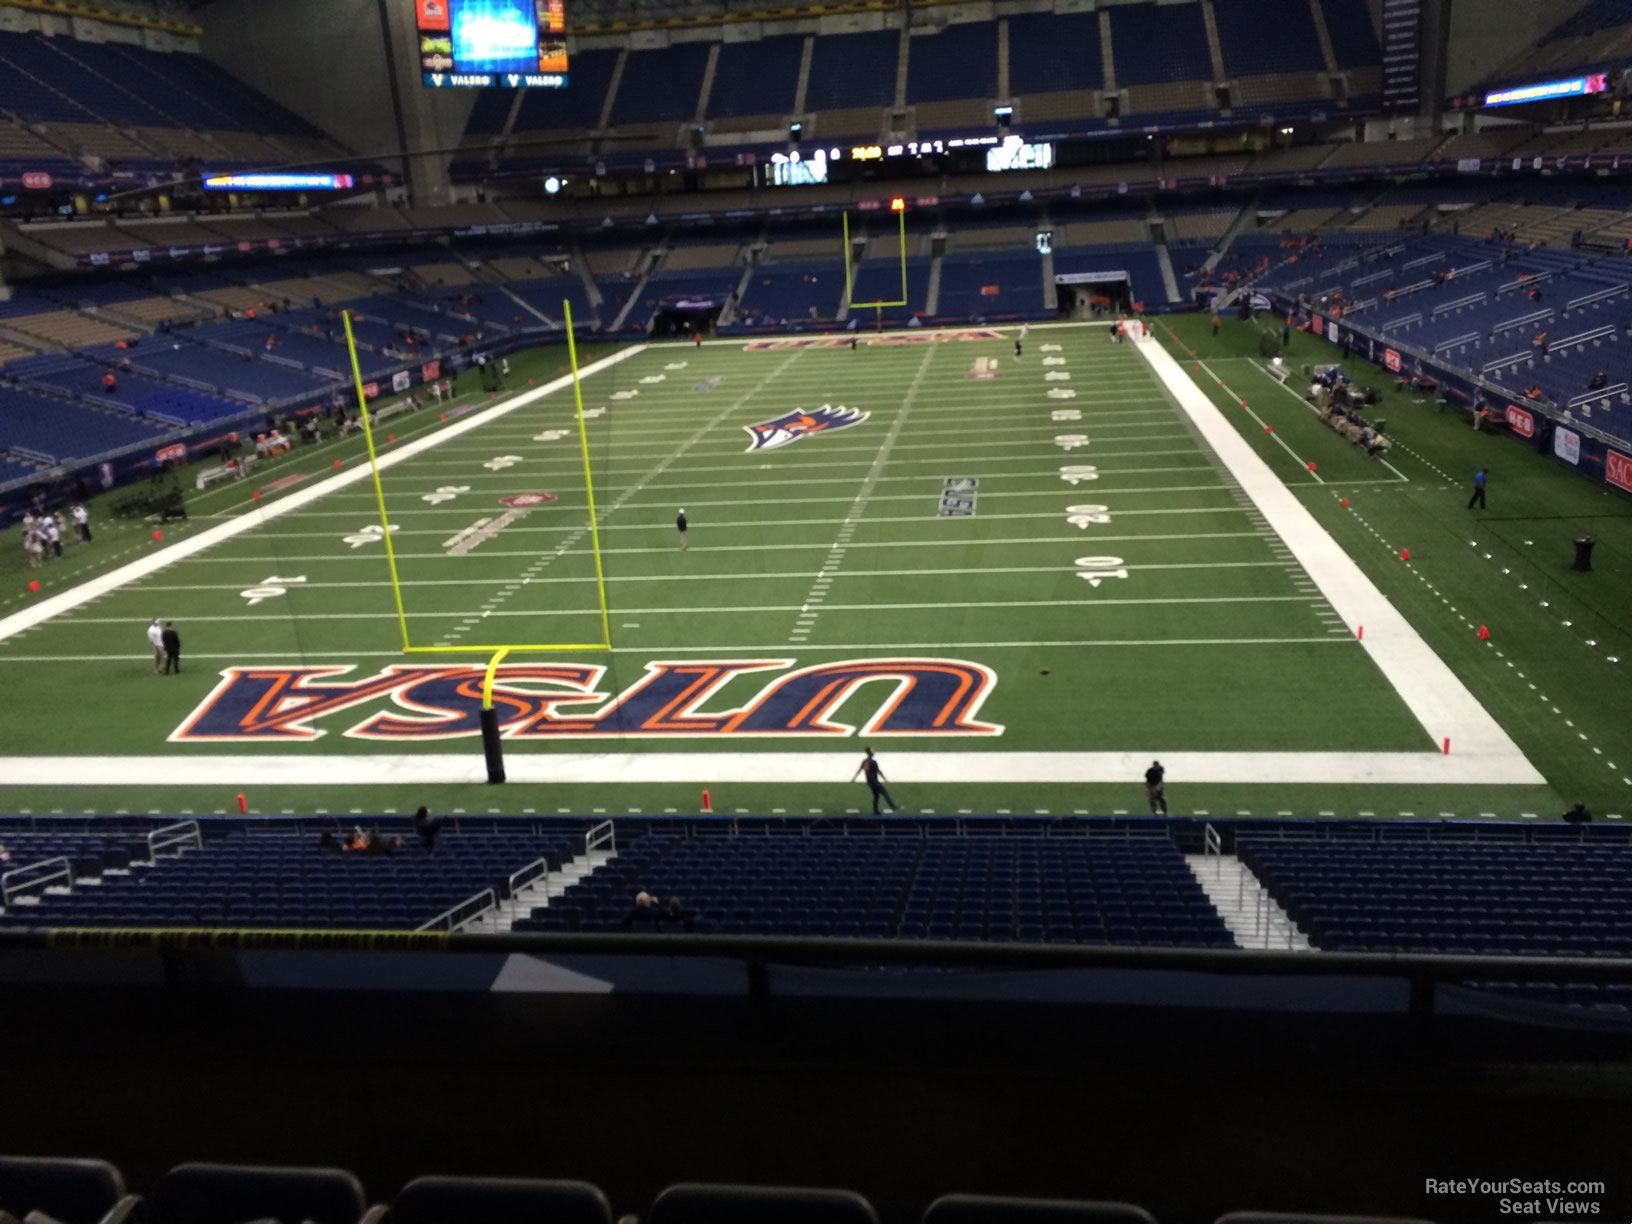 section 244, row 5 seat view  for football - alamodome